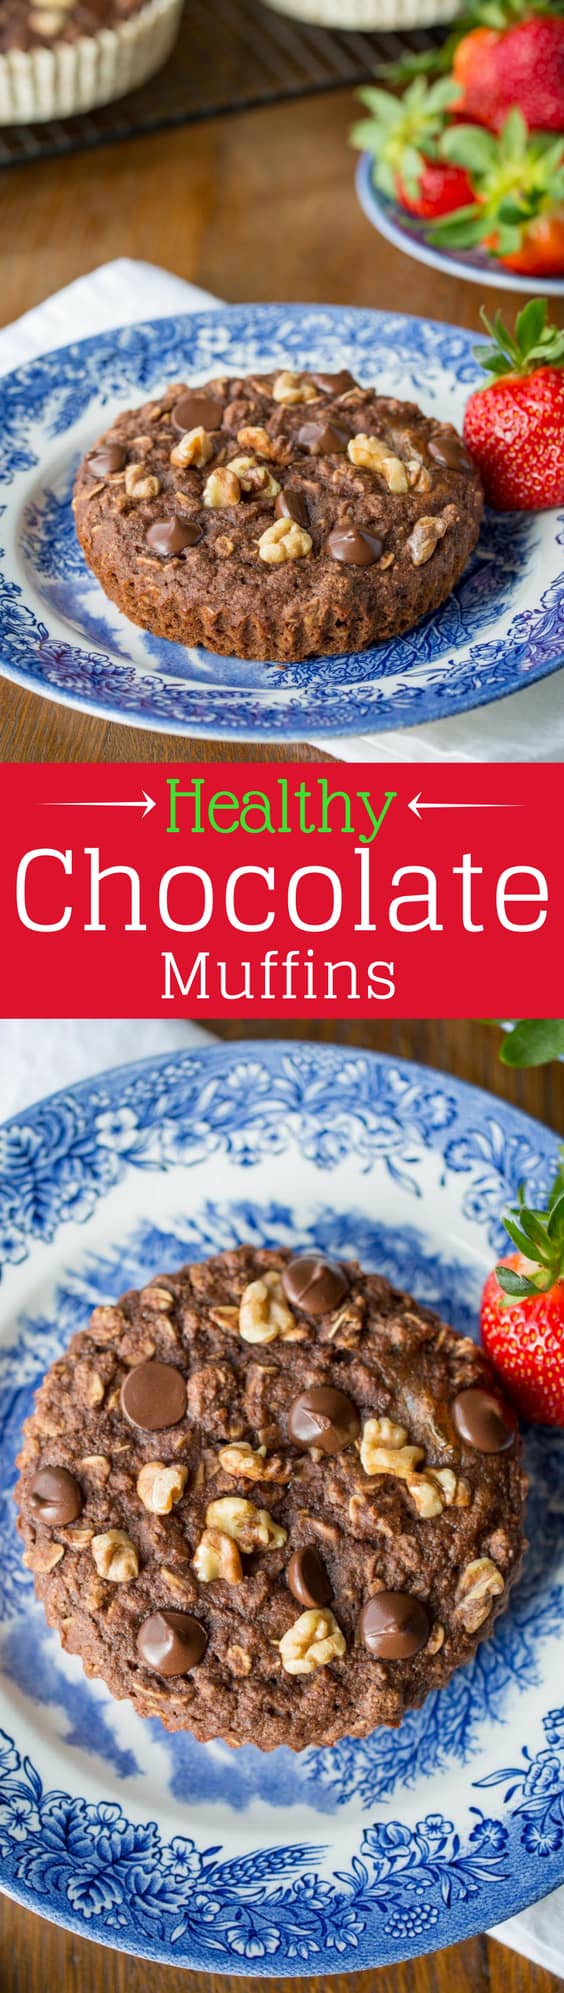 Healthy Chocolate Muffins ~ with no added sugar! Loaded with spelt flour, oats, ground flaxseed meal, and coconut oil, and sweetened with applesauce and honey. Topped with dark chocolate chips and chopped walnuts. DELICIOUS! www.savingdessert.com